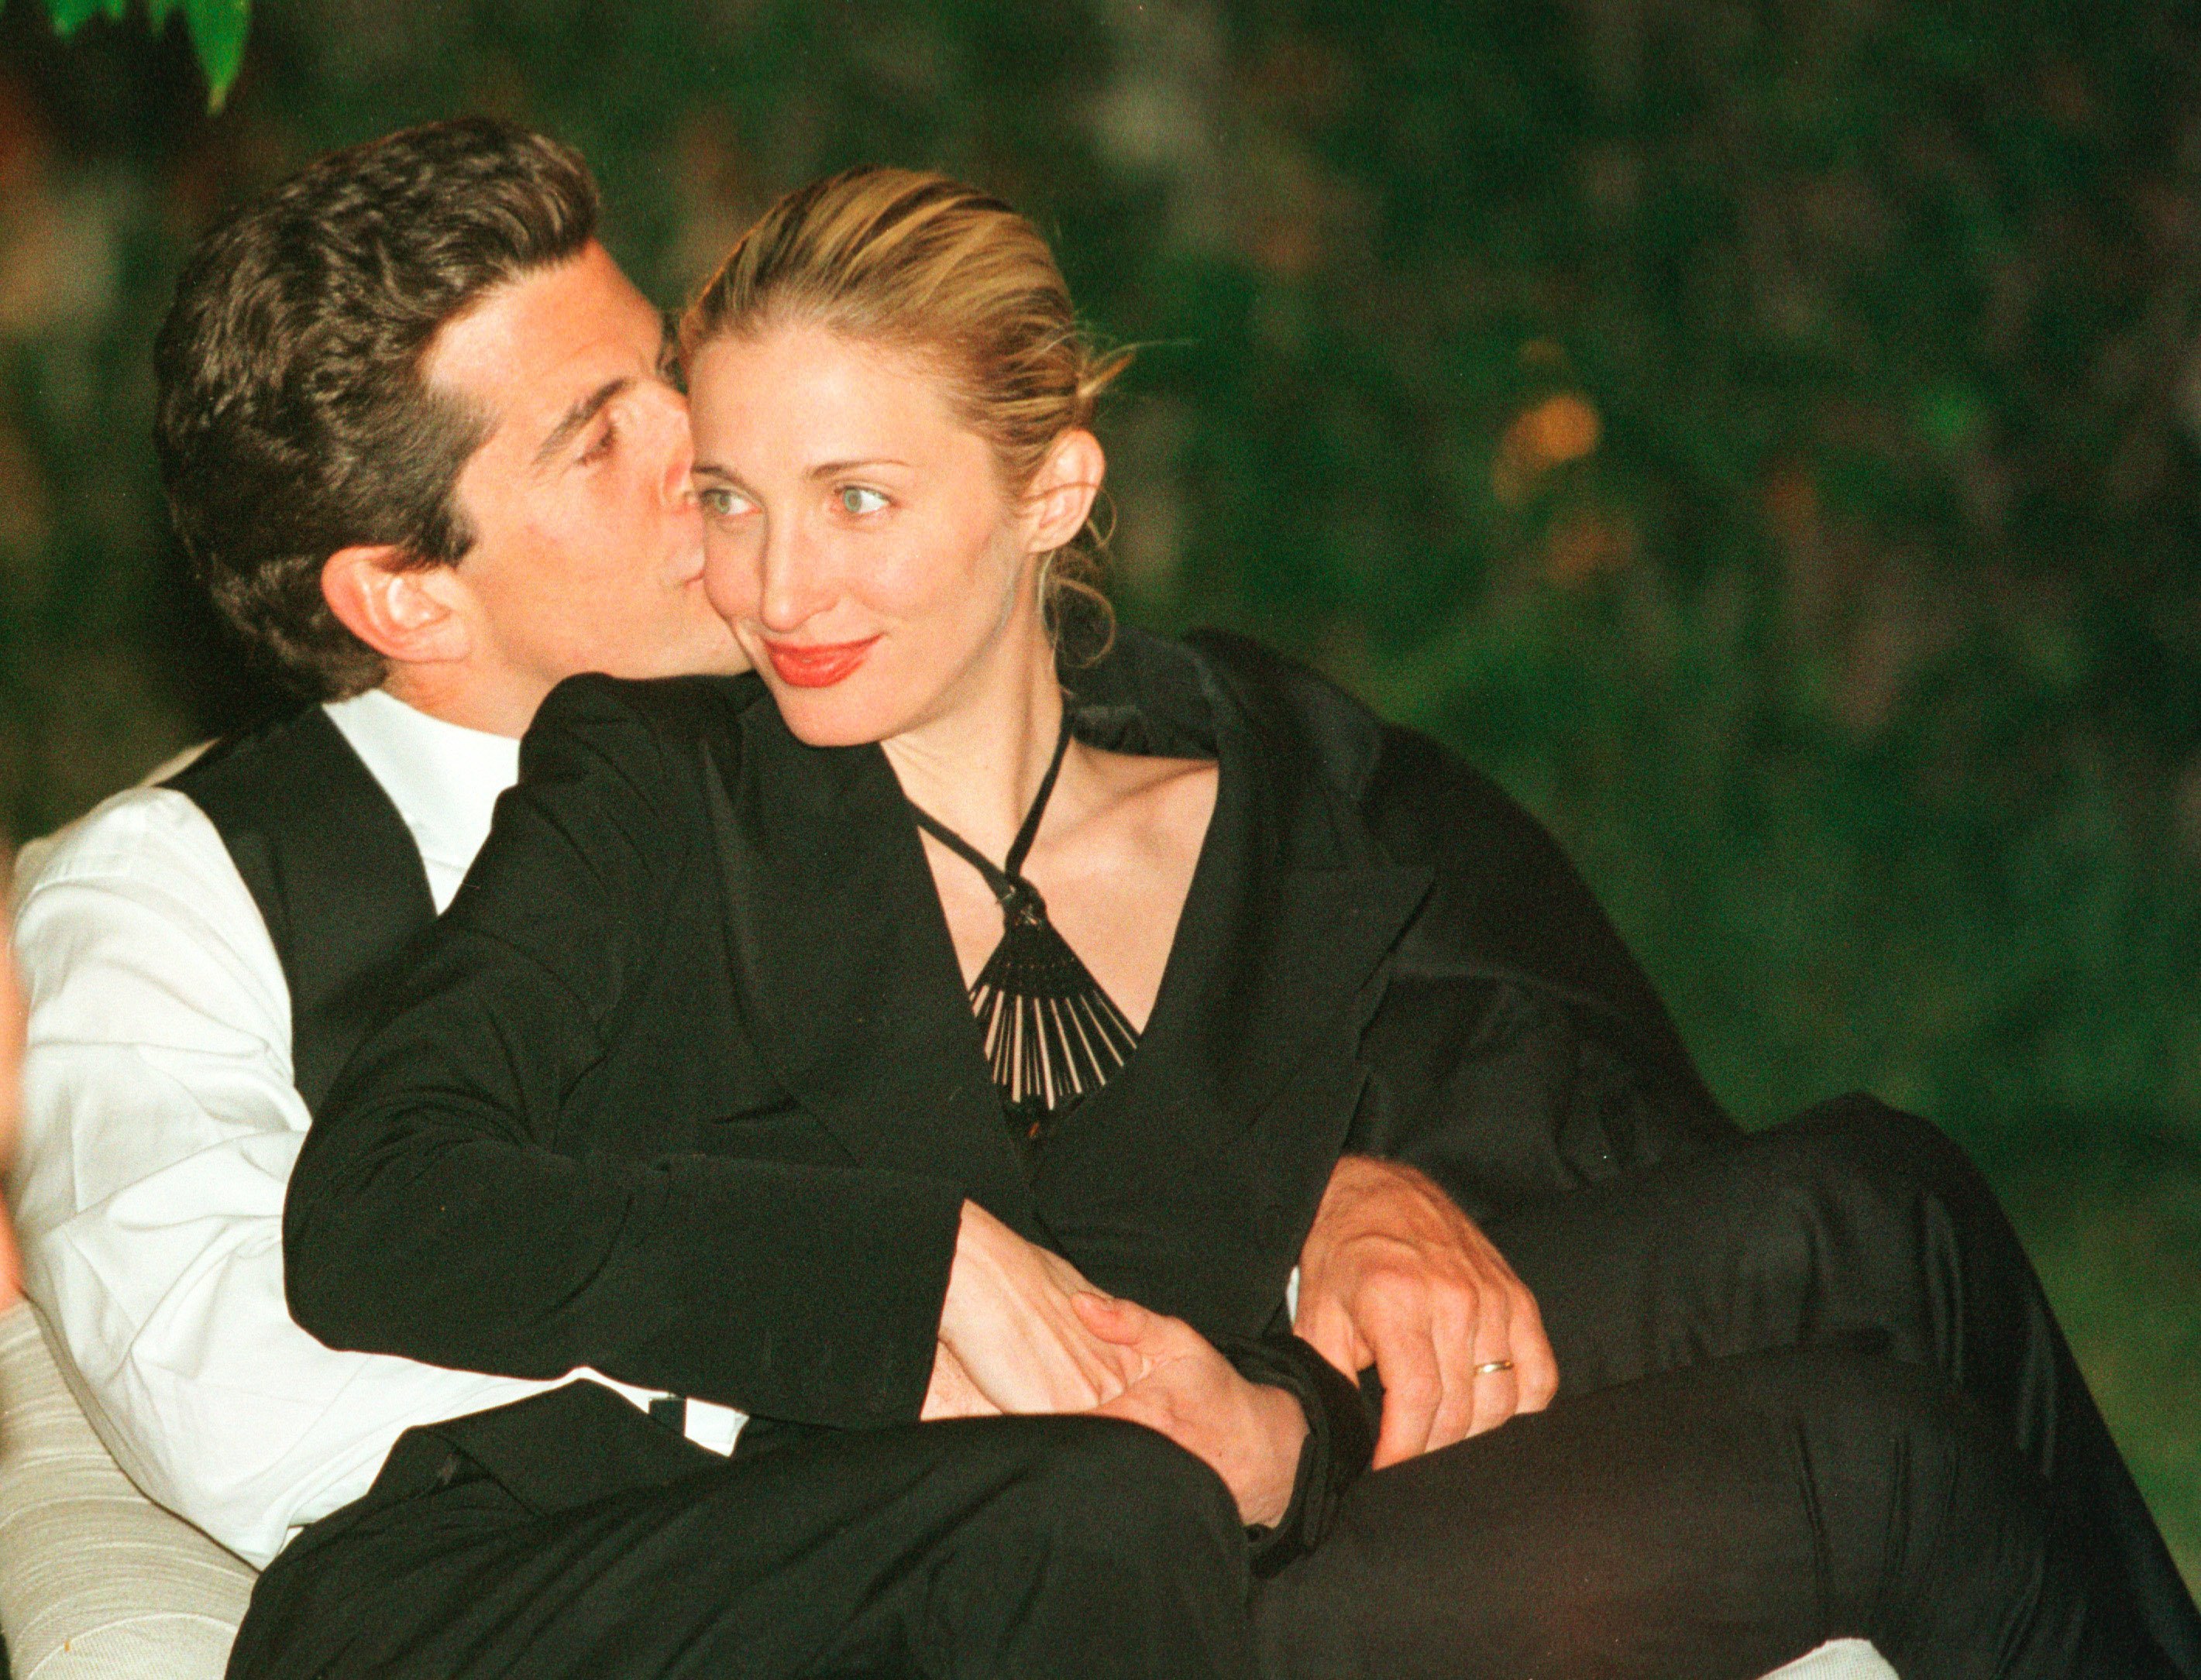 Caroline Bessette and JFK Jr. during the annual White House Correspondents Association dinner on May 1, 1999. | Source: Getty Images